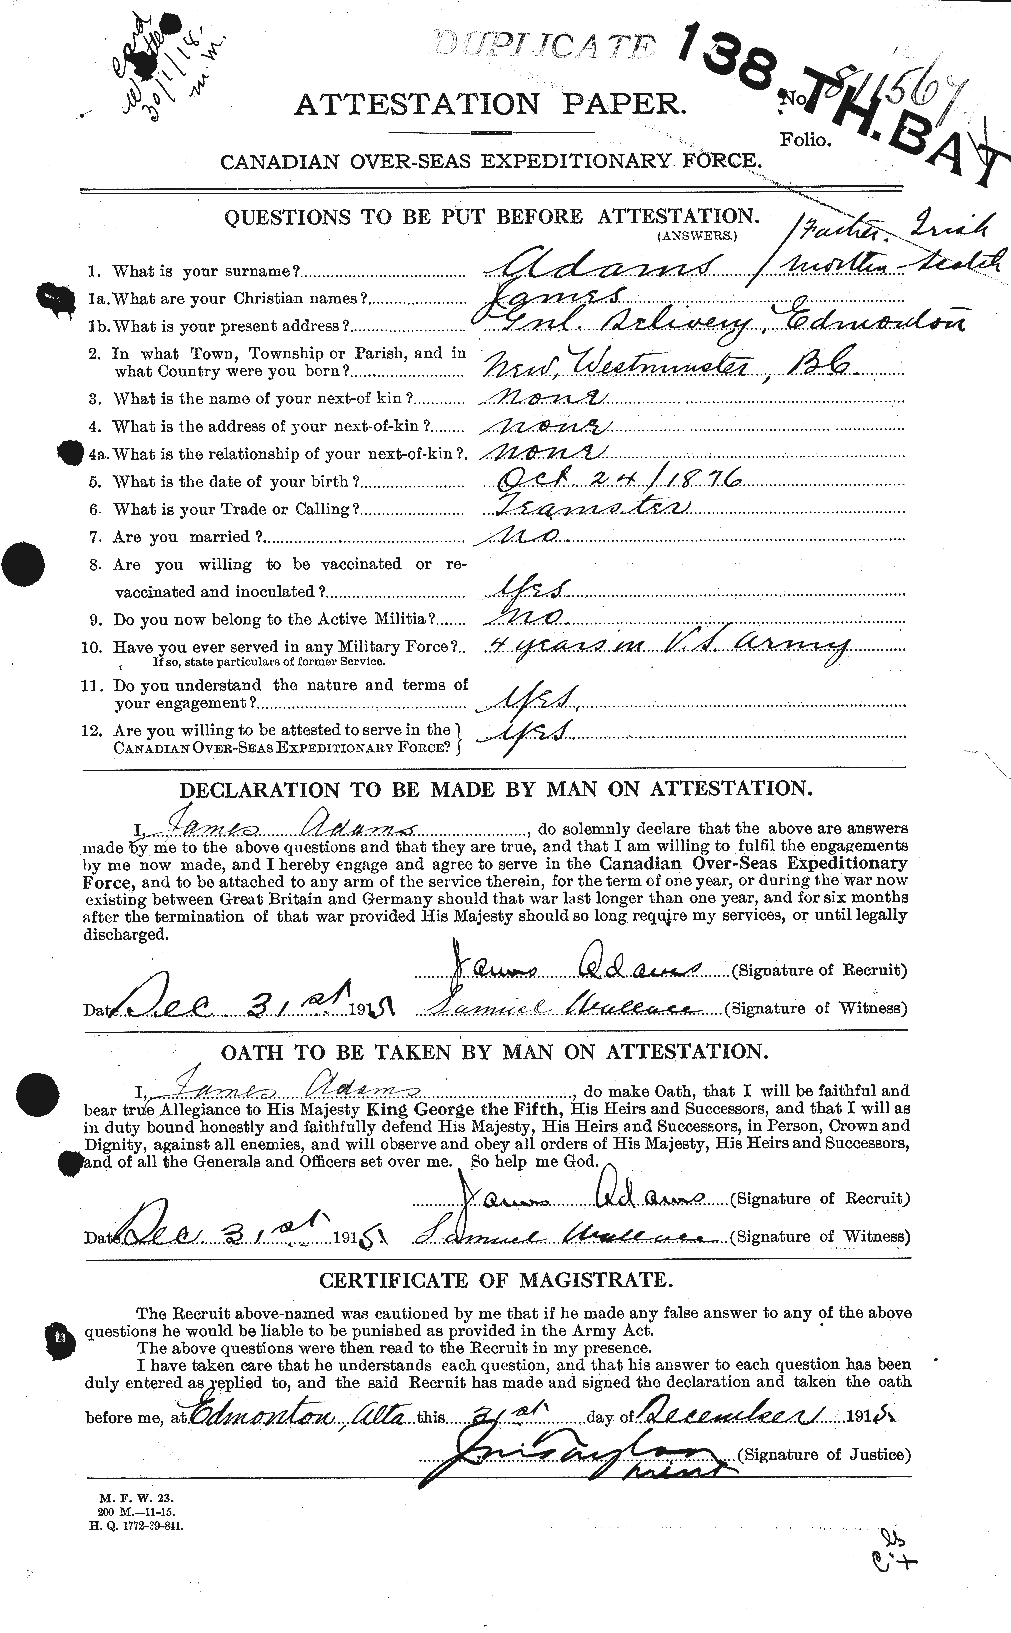 Personnel Records of the First World War - CEF 203240a